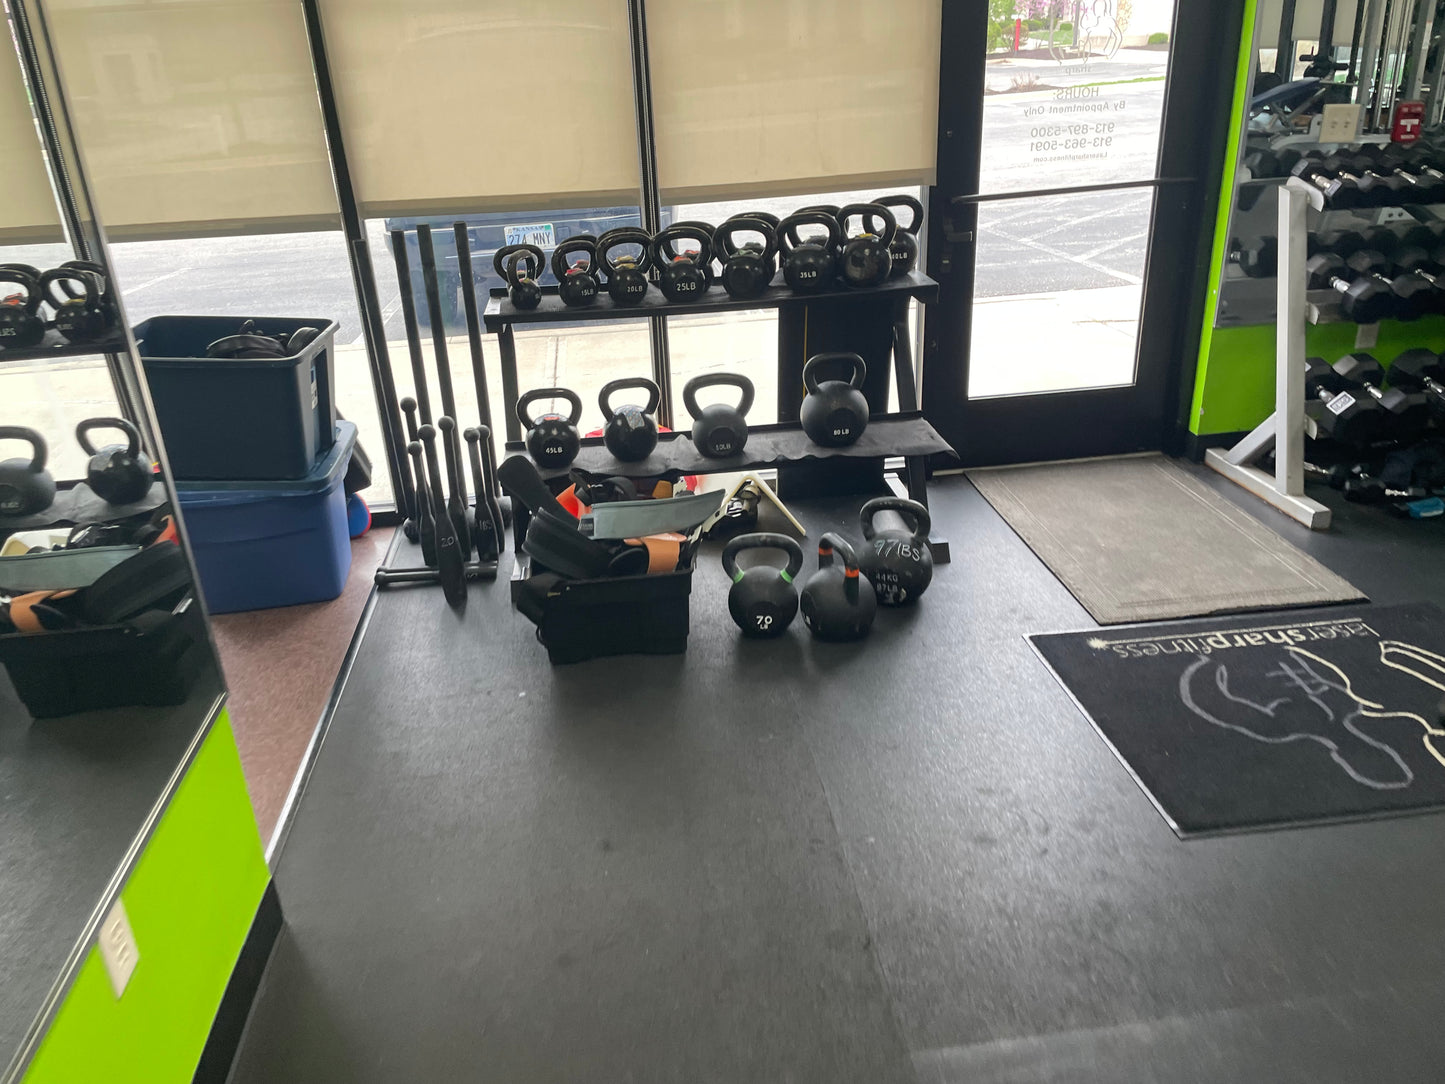 Full Gym Package Freemotion/Paramount/Promaxima w/ full set of Dumbbells & Kettlebells and more